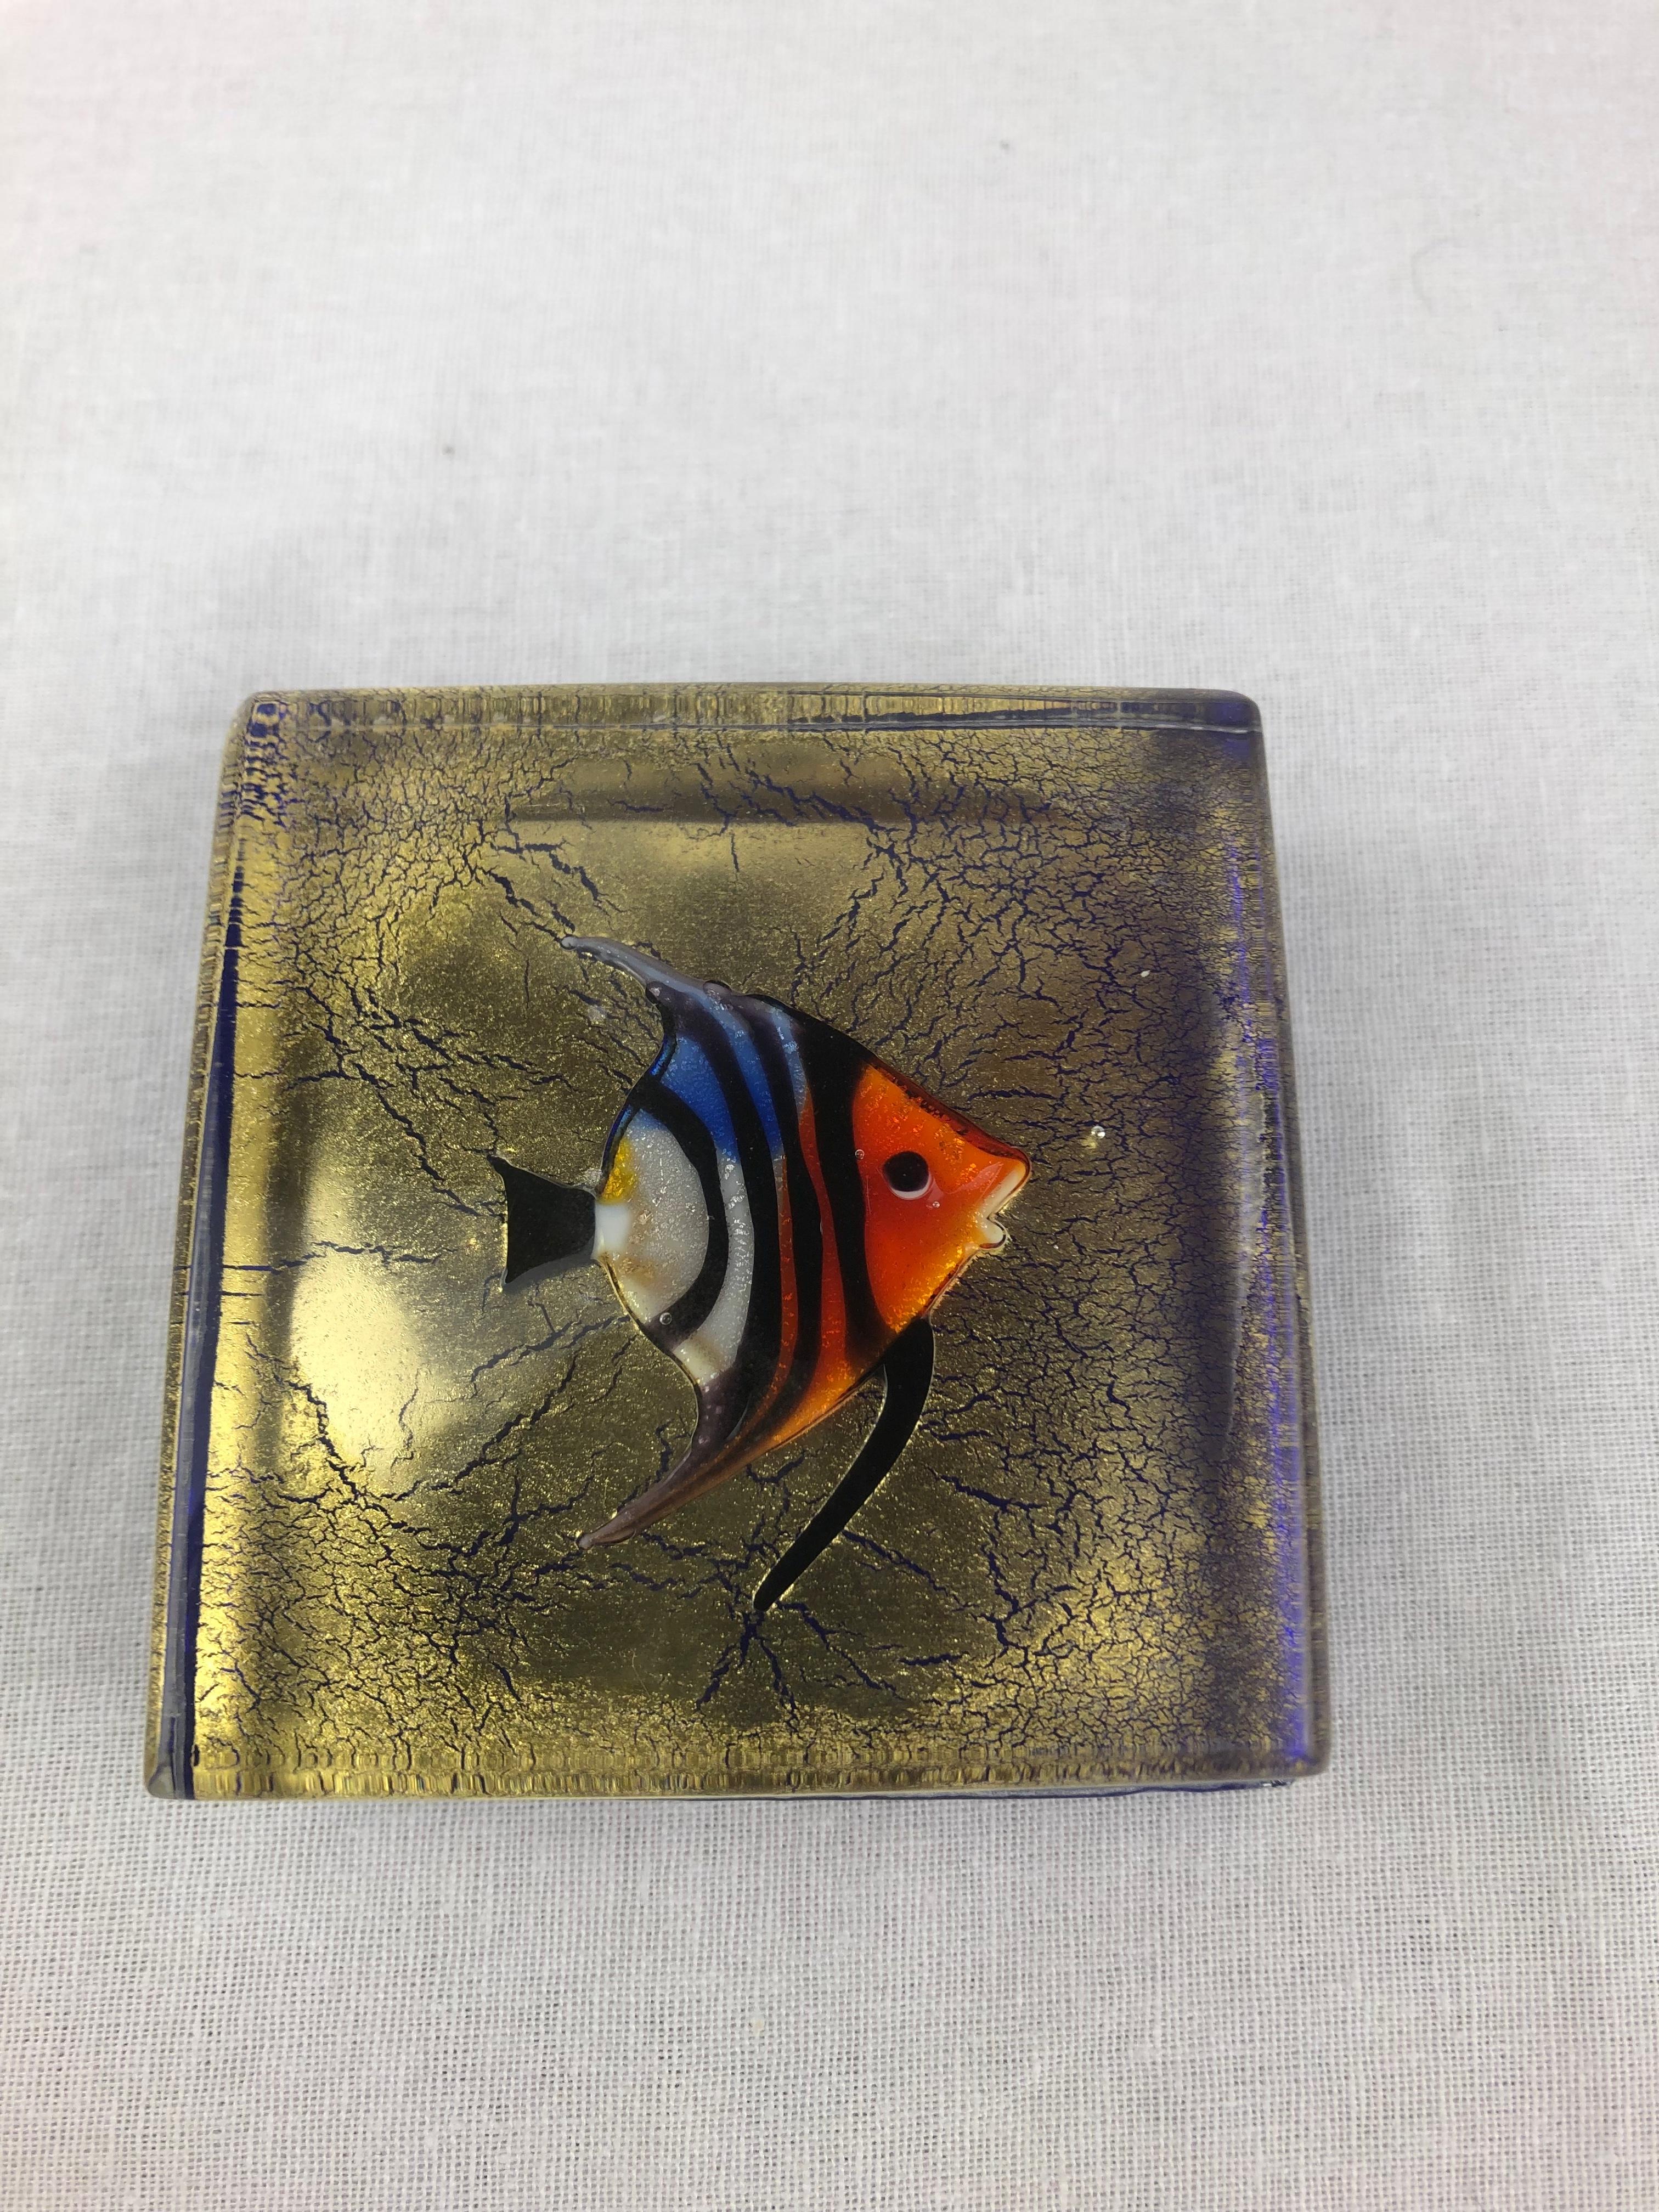 Beautiful, playful and colorful paperweight that will spark your imagination every time you put your eyes on it.
Murano art glass, signed. 

A nice addition to any desktop.

Measures: 2 1/2